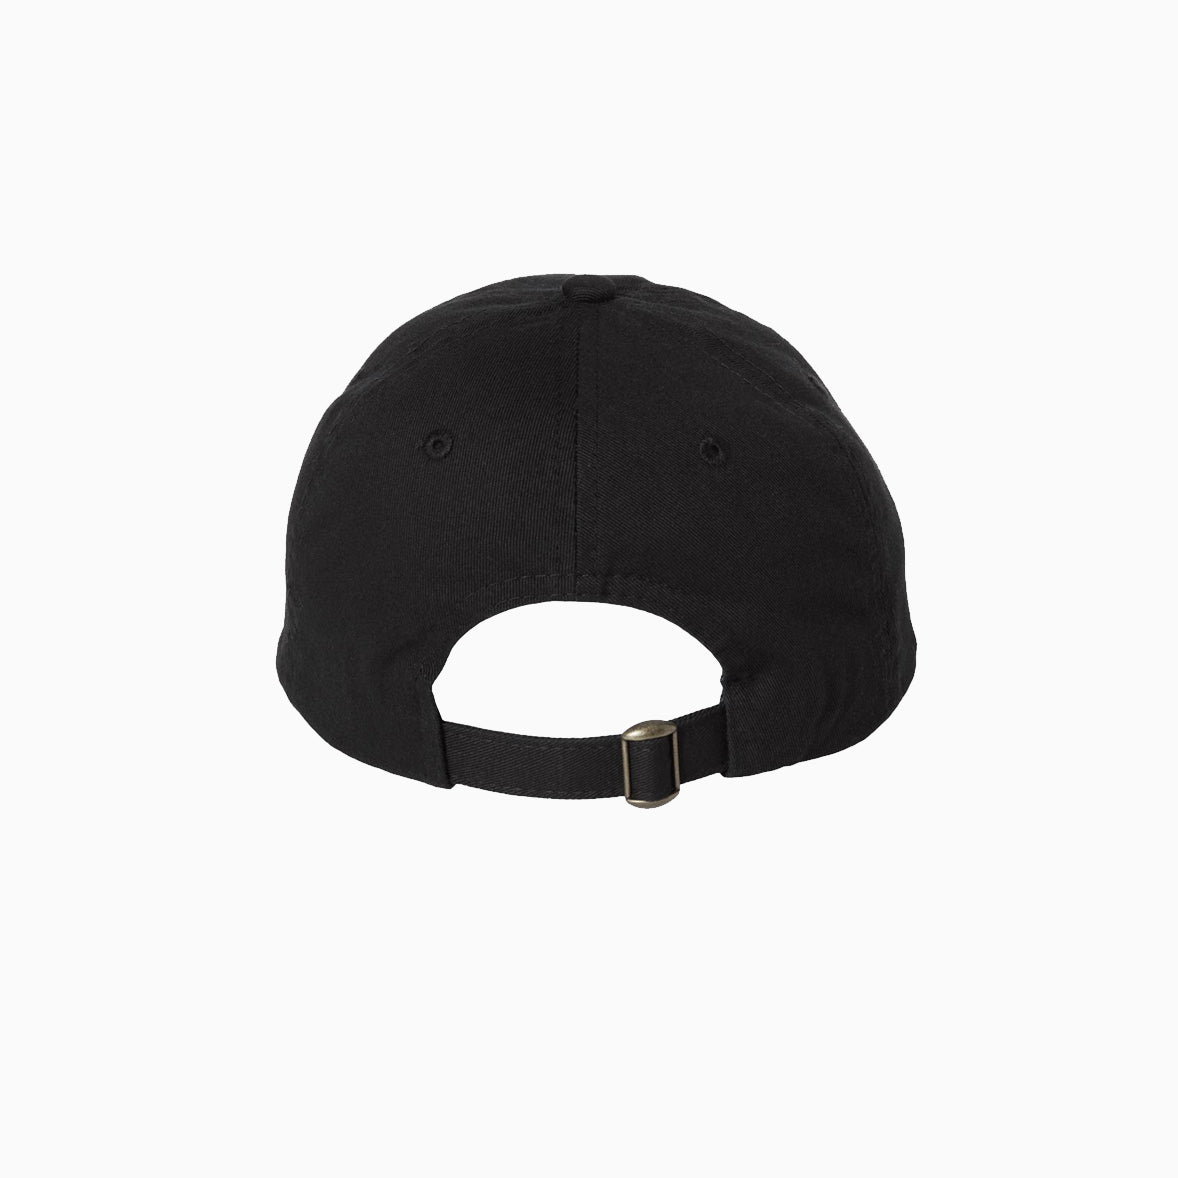 The Le Youth Signature Dad Hat - Black